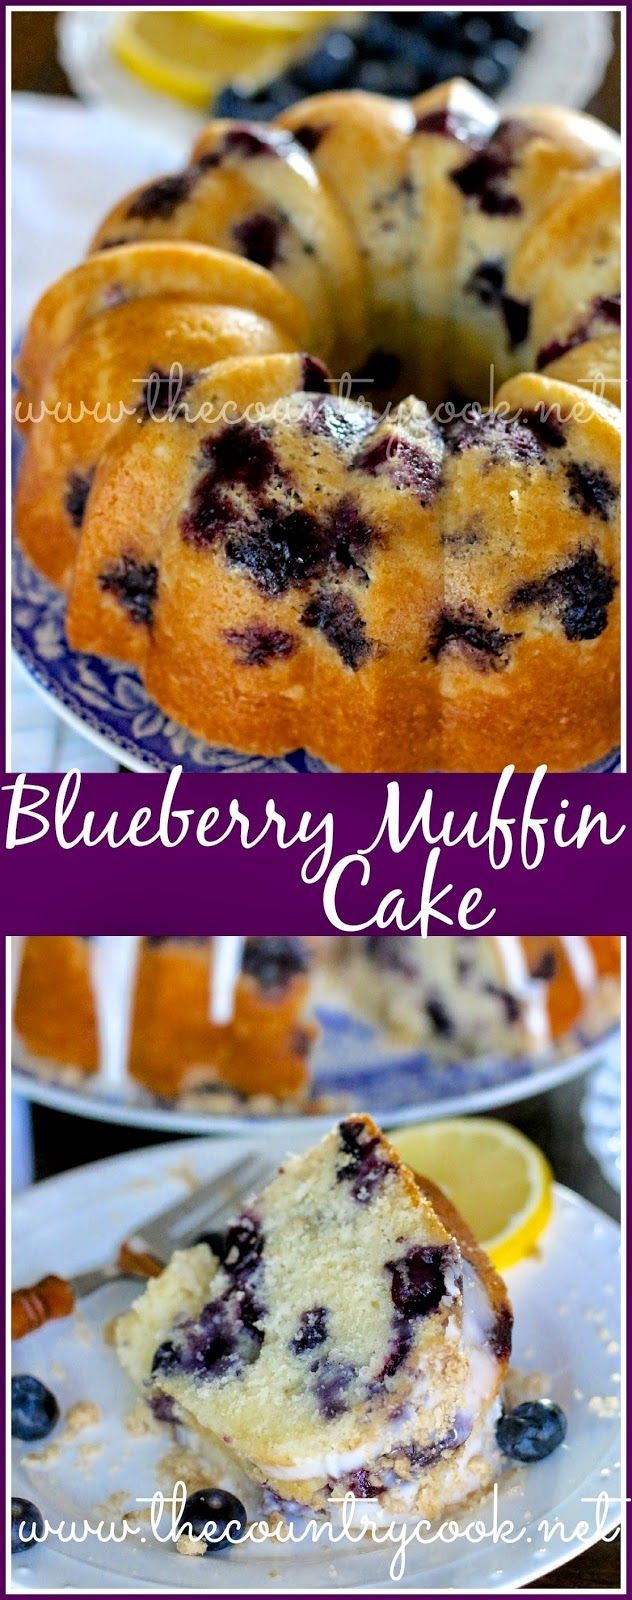 Blueberry Muffin Cake – one of THE BEST cakes I’ve made in a long time. Homemade, moist & yummy with a hin